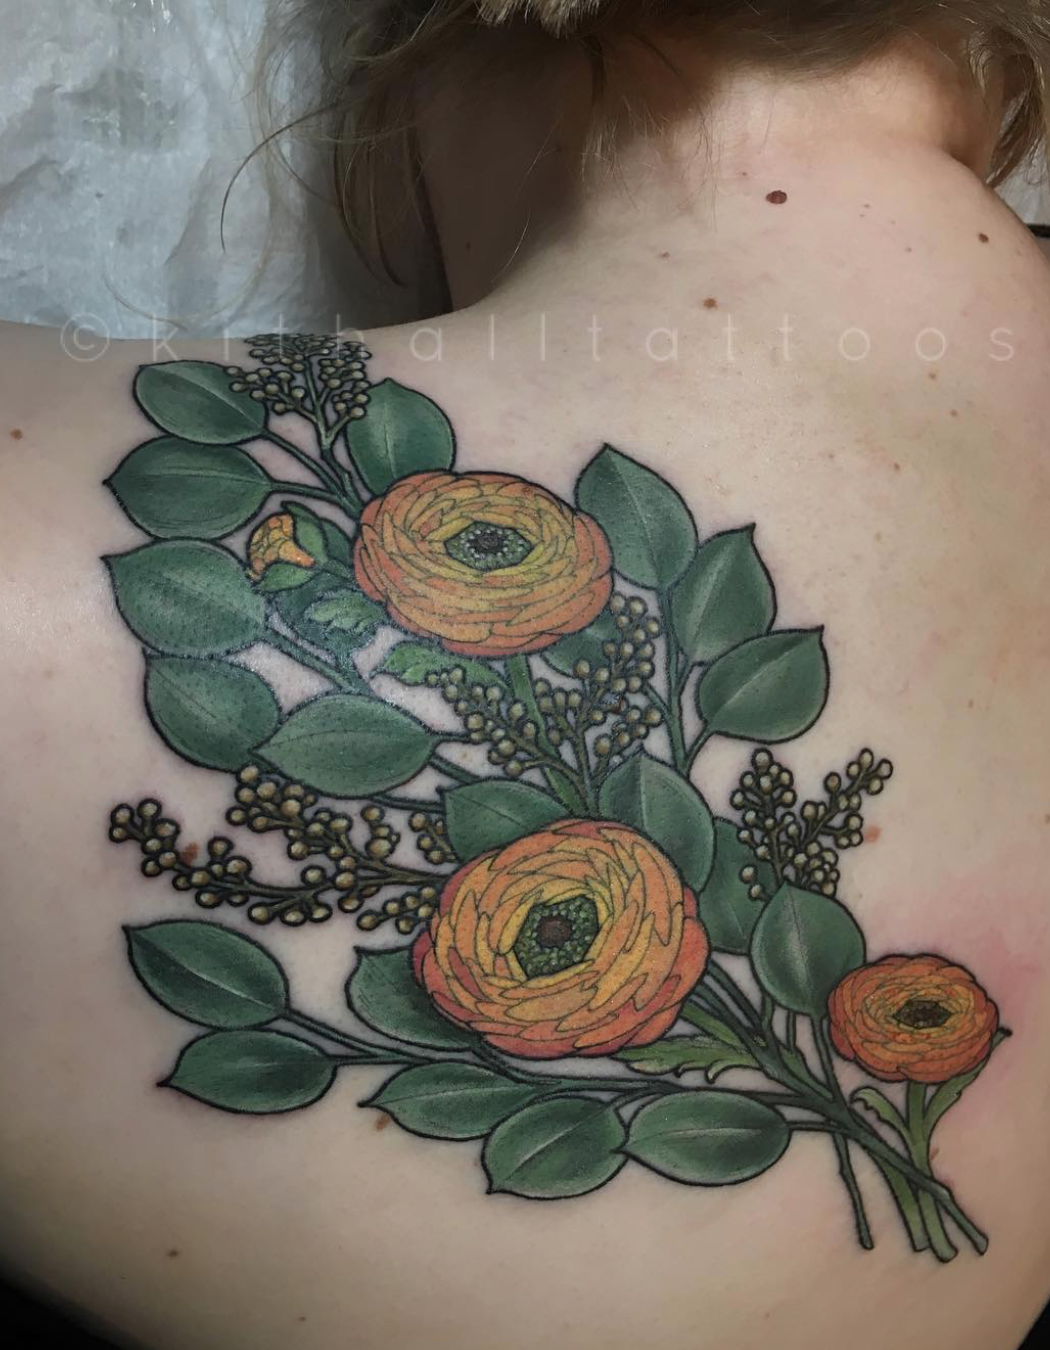 Floral tattoo by Kit Evans